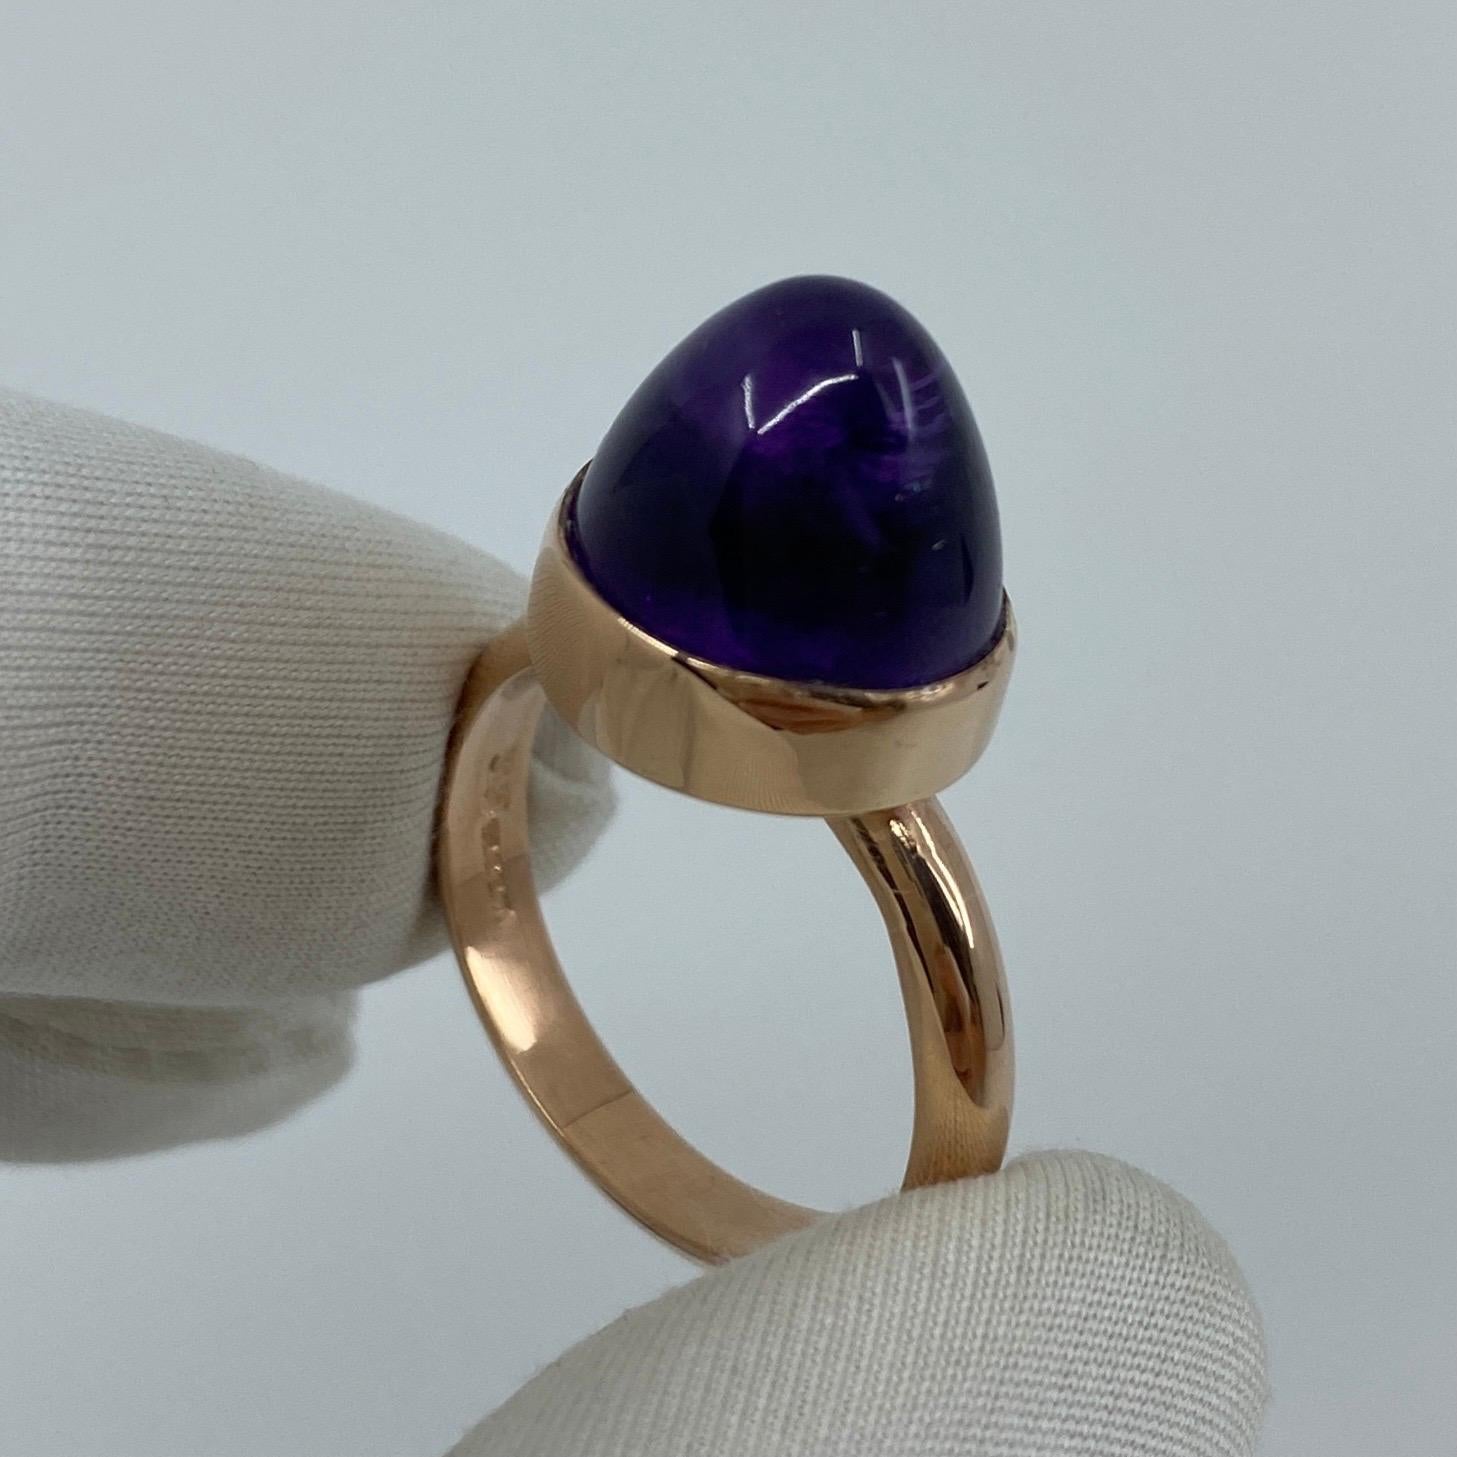 Pointed Cabochon Amethyst 9k Rose Gold Handmade Ring.

Beautiful deep purple amethyst with a unique pointed cabochon cut.
Set in a handmade rubover solitaire ring.

Ring size Q1/2. The ring is re-sizeable.

The ring is brand new and never worn.
A